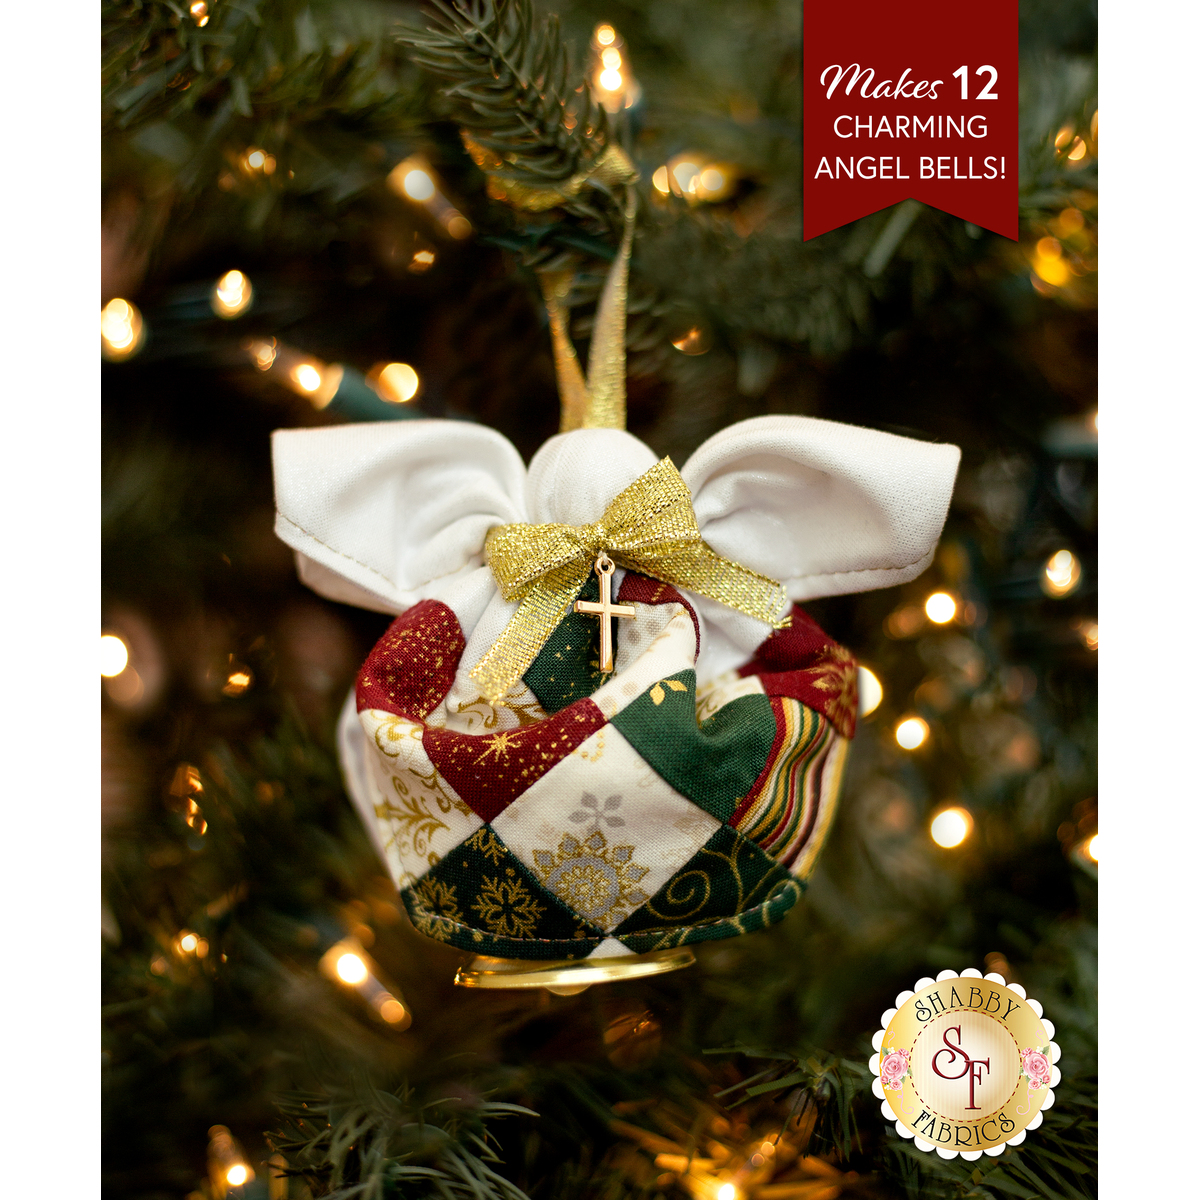 Fabric Christmas Bell Christmas Tree Ornament Sewing Pattern & VIDEO  Tutorial PDF Easy DIY Holiday Decor Gift to Sew Beginners Sewing 